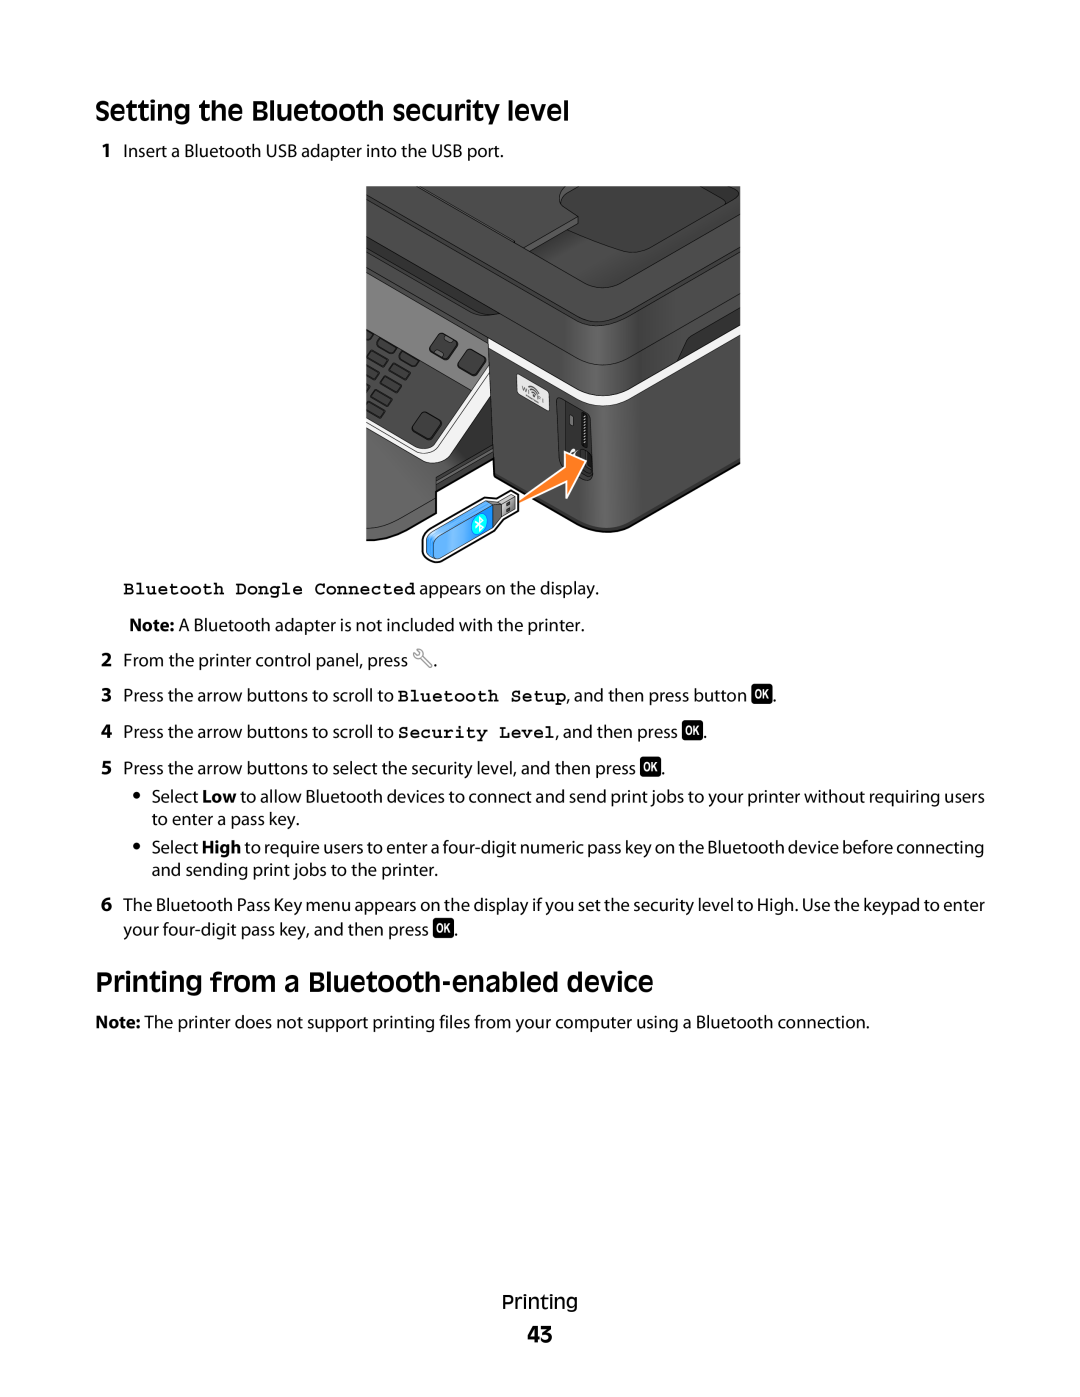 Dell V515W manual Setting the Bluetooth security level, Printing from a Bluetooth-enabled device 